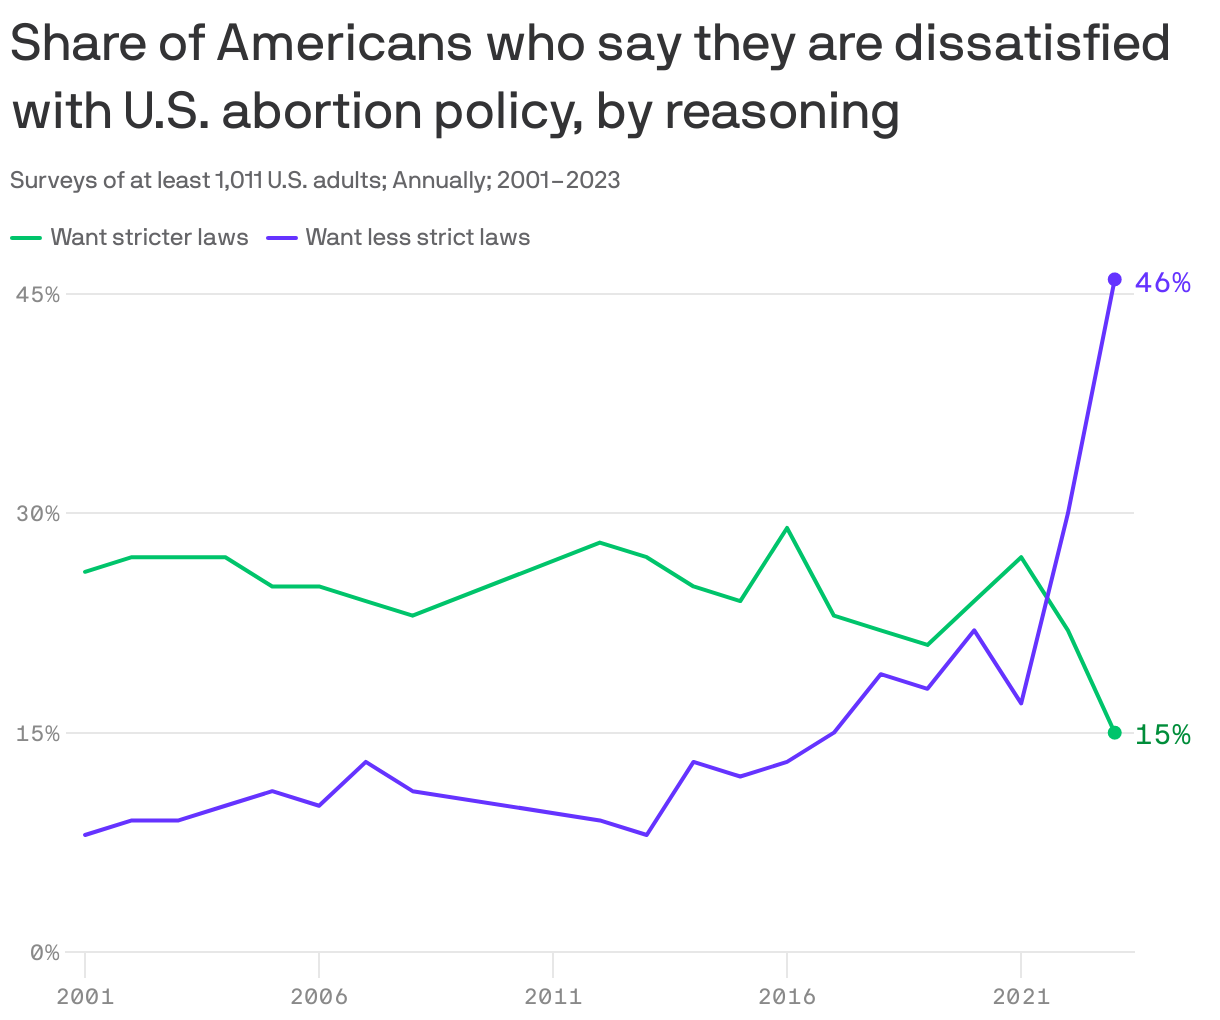 Share of Americans who say they are dissatisfied with U.S. abortion policy, by reasoning